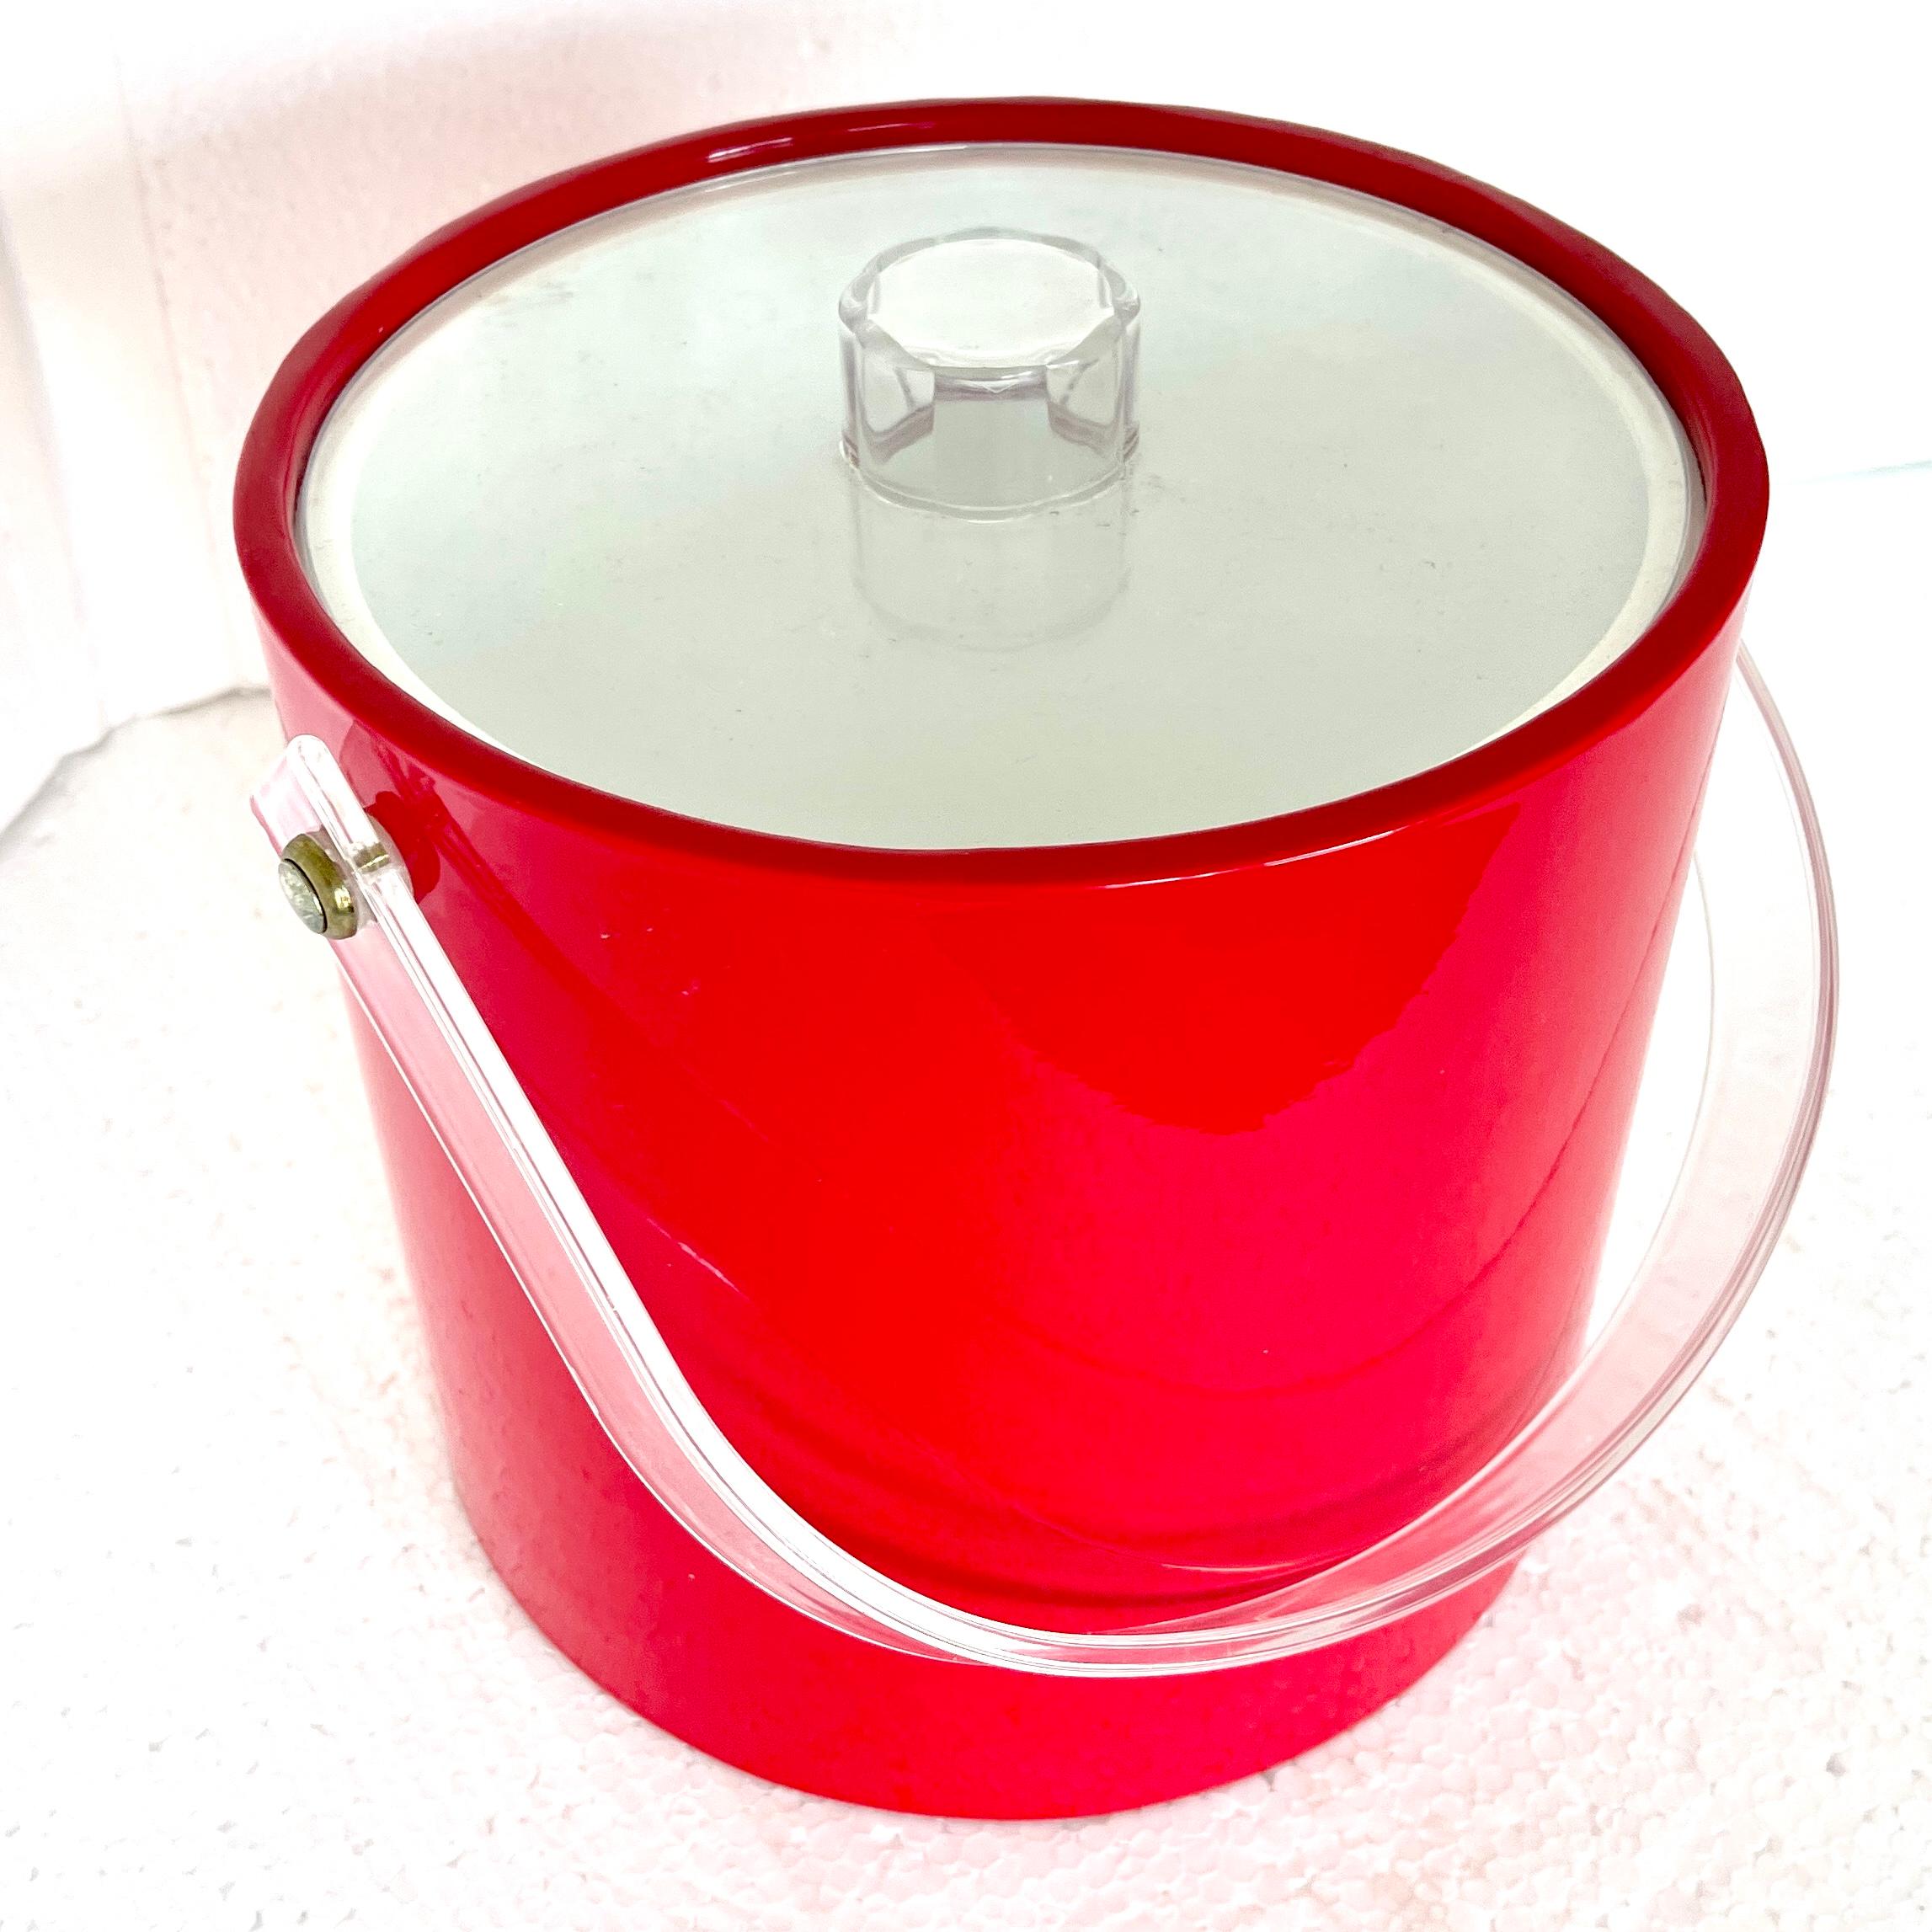 American Mid-Century Modern Red Faux Leather Ice Bucket, circa 1960's